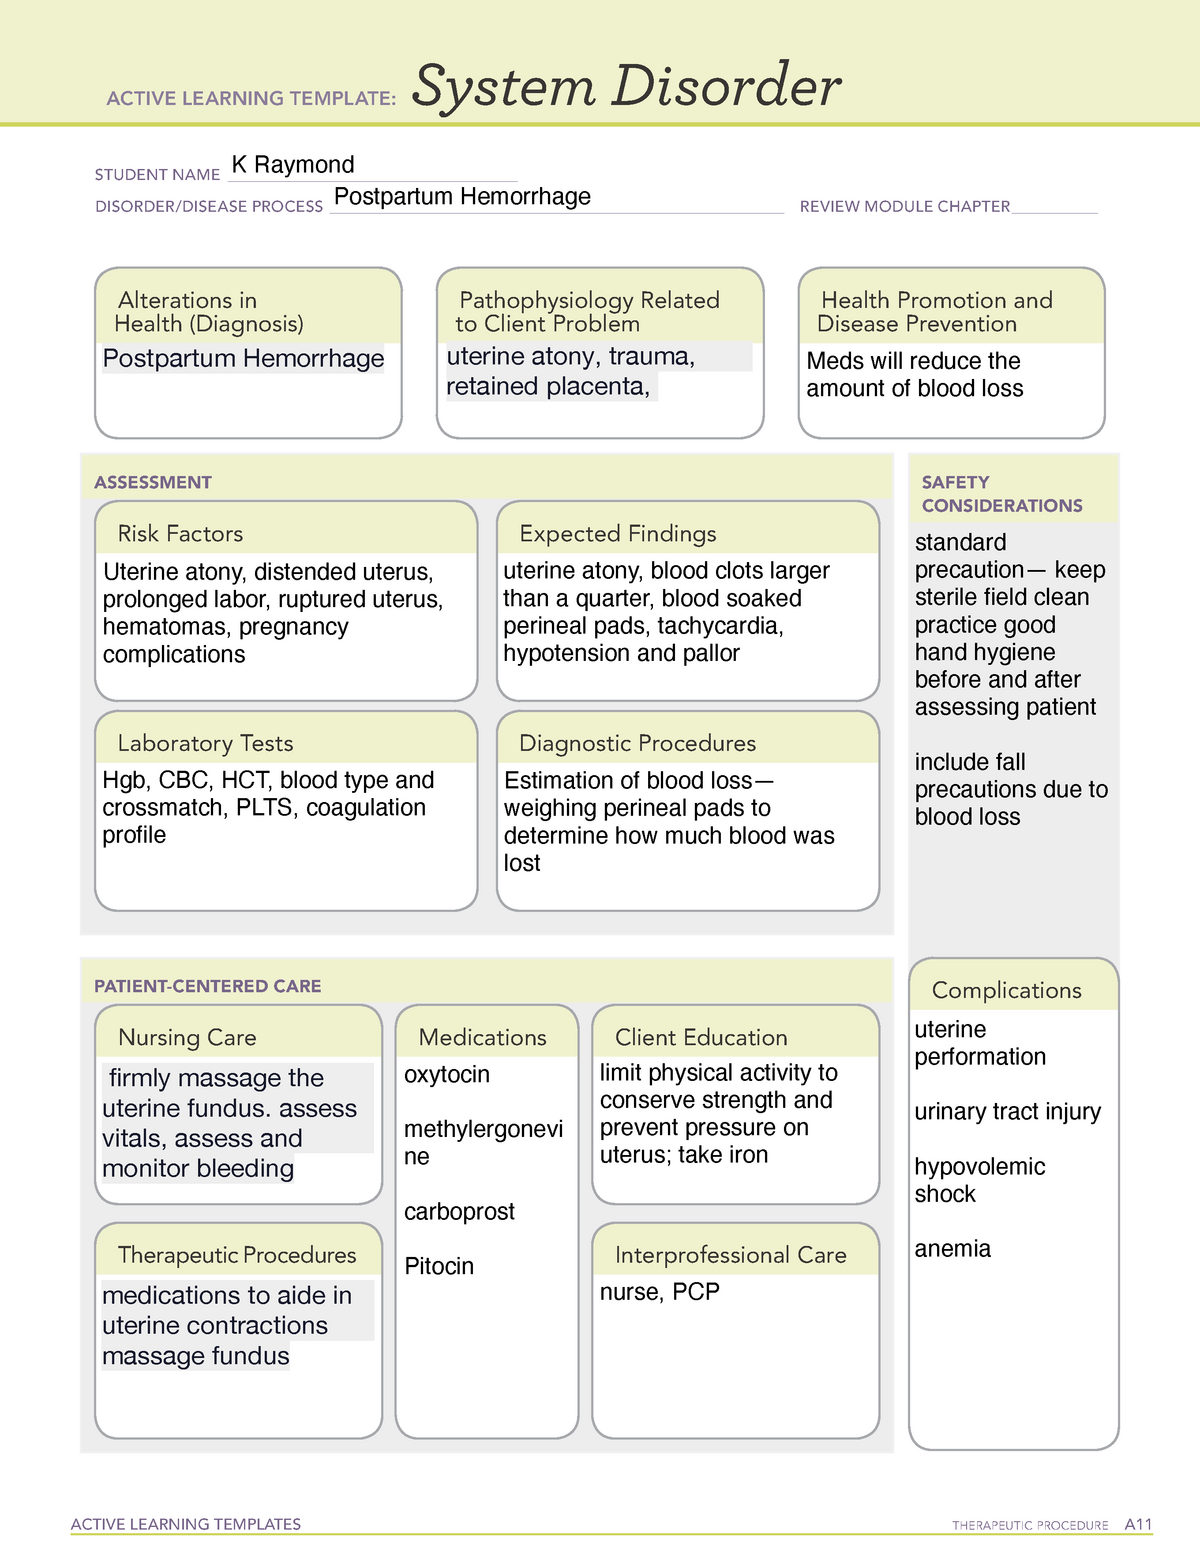 System disorder postpartum hemorrhage ACTIVE LEARNING TEMPLATES